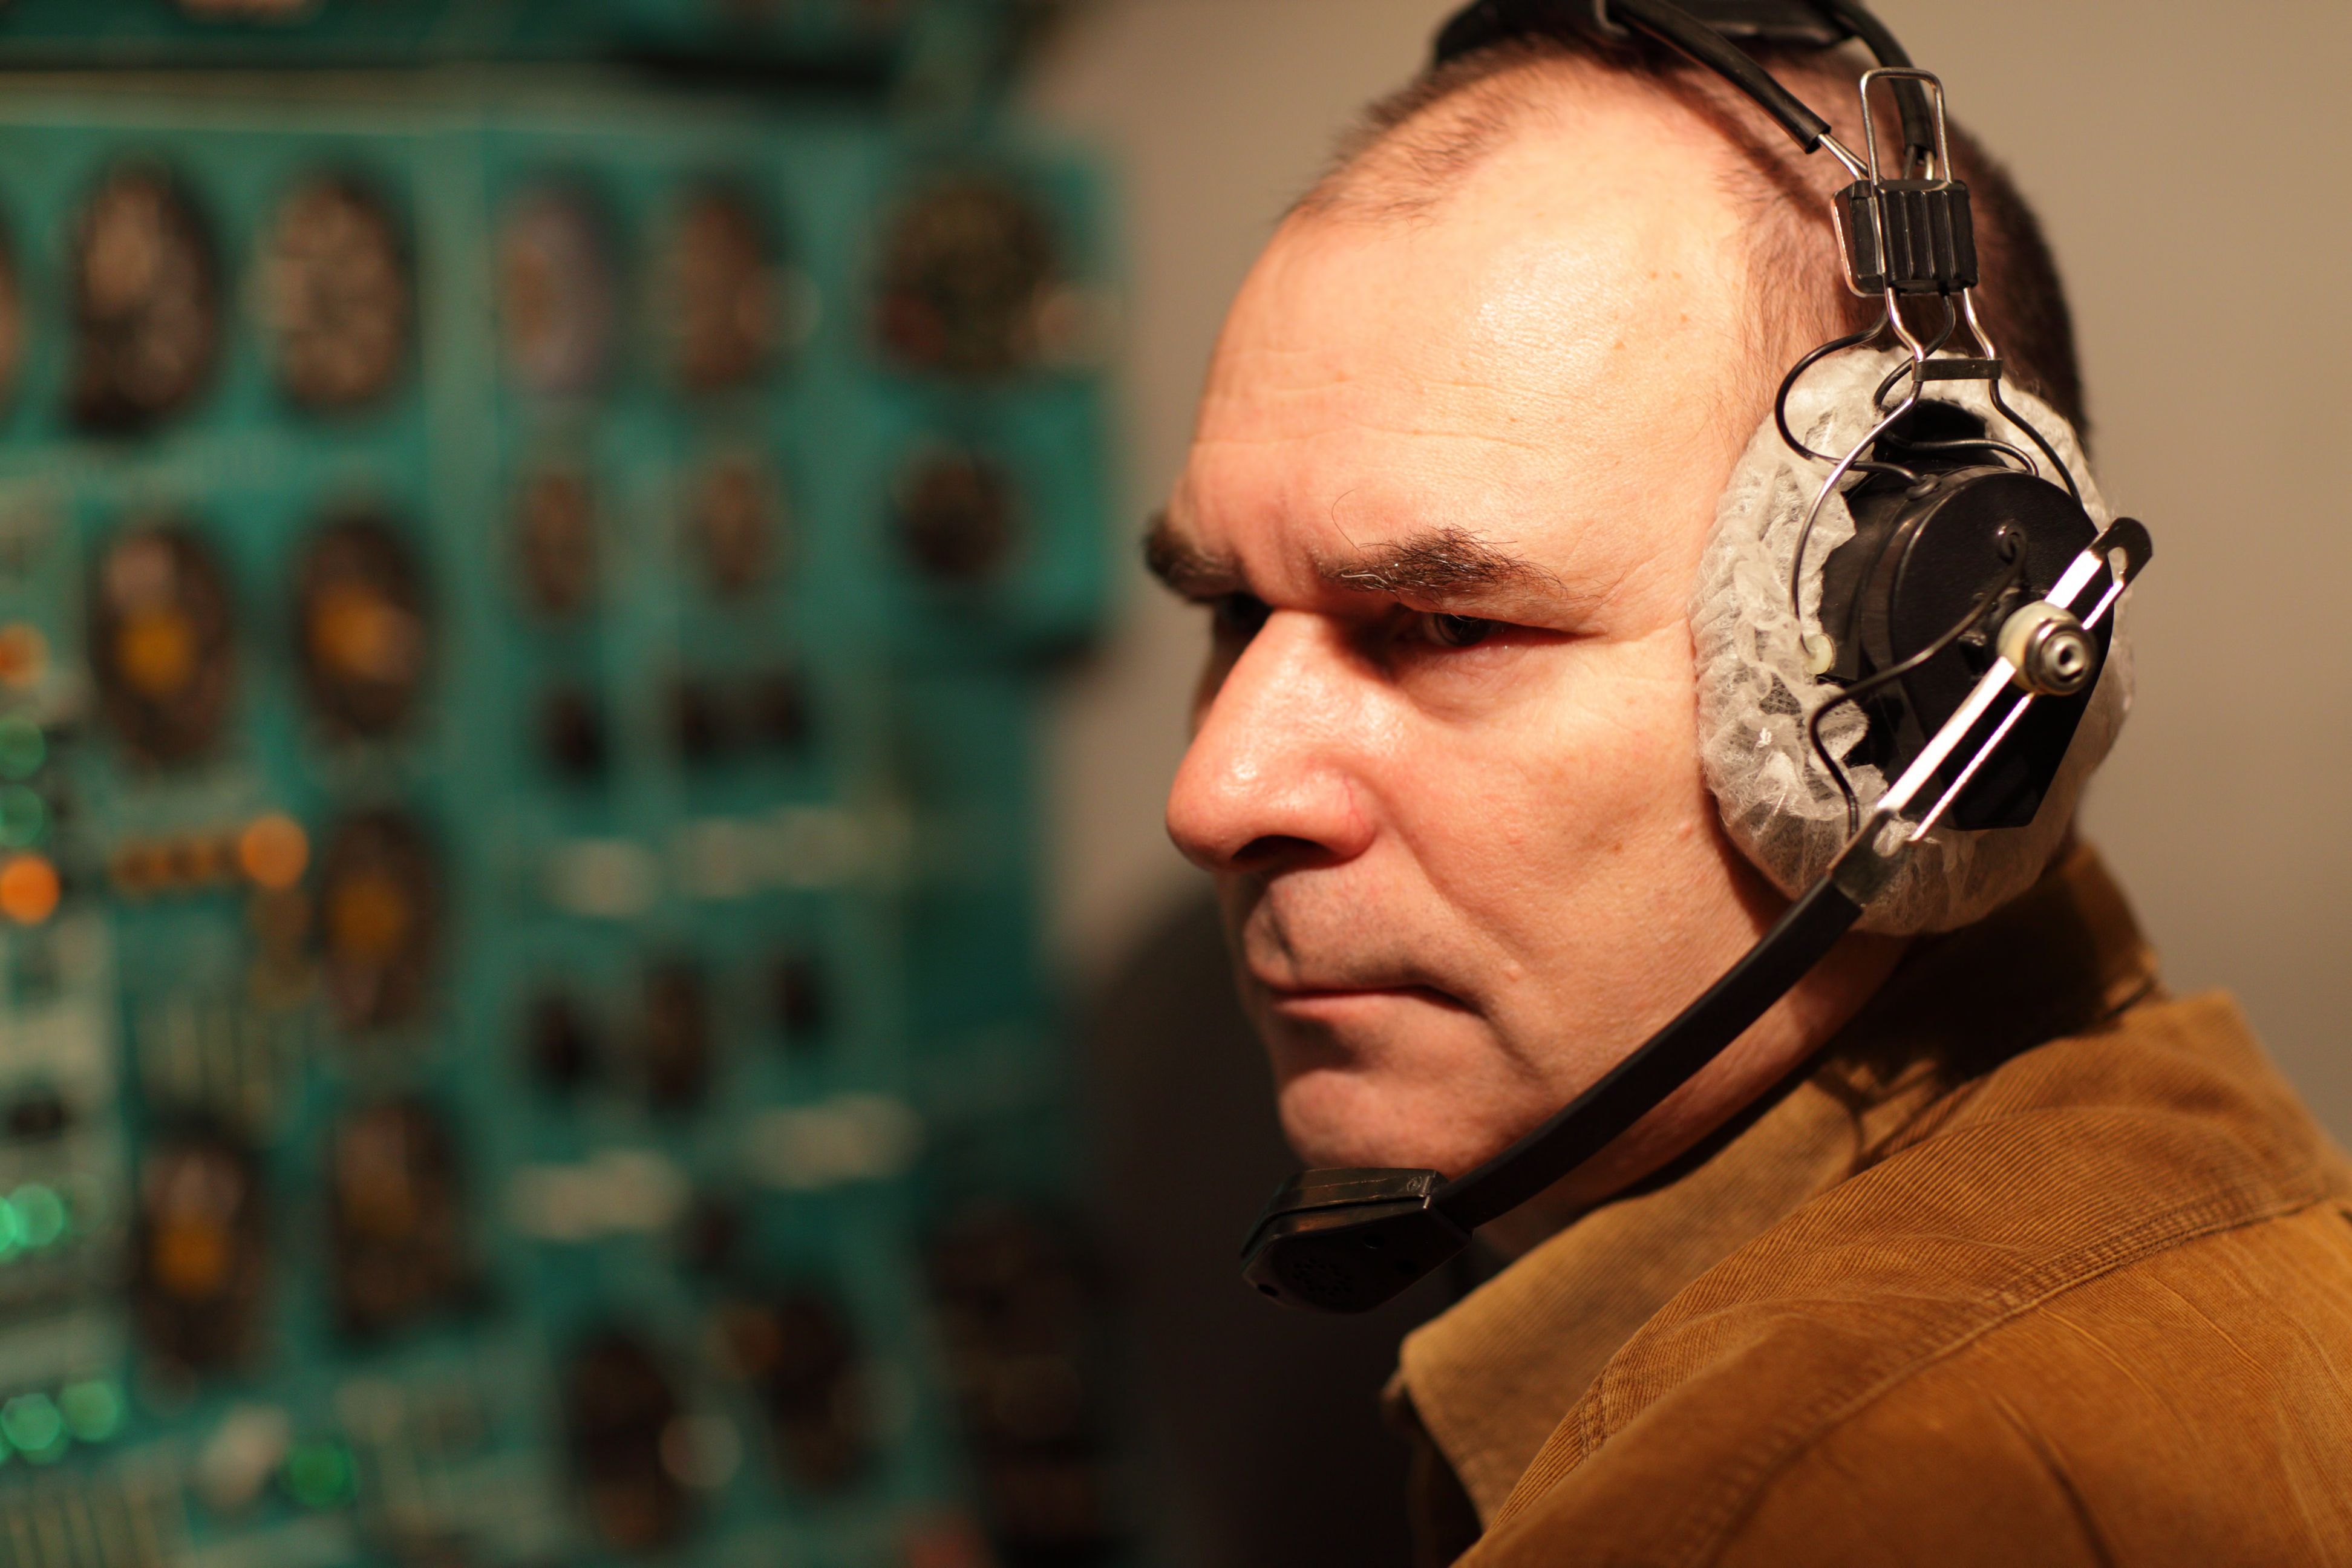 A flight engineer wearing an older noise reduction headset.